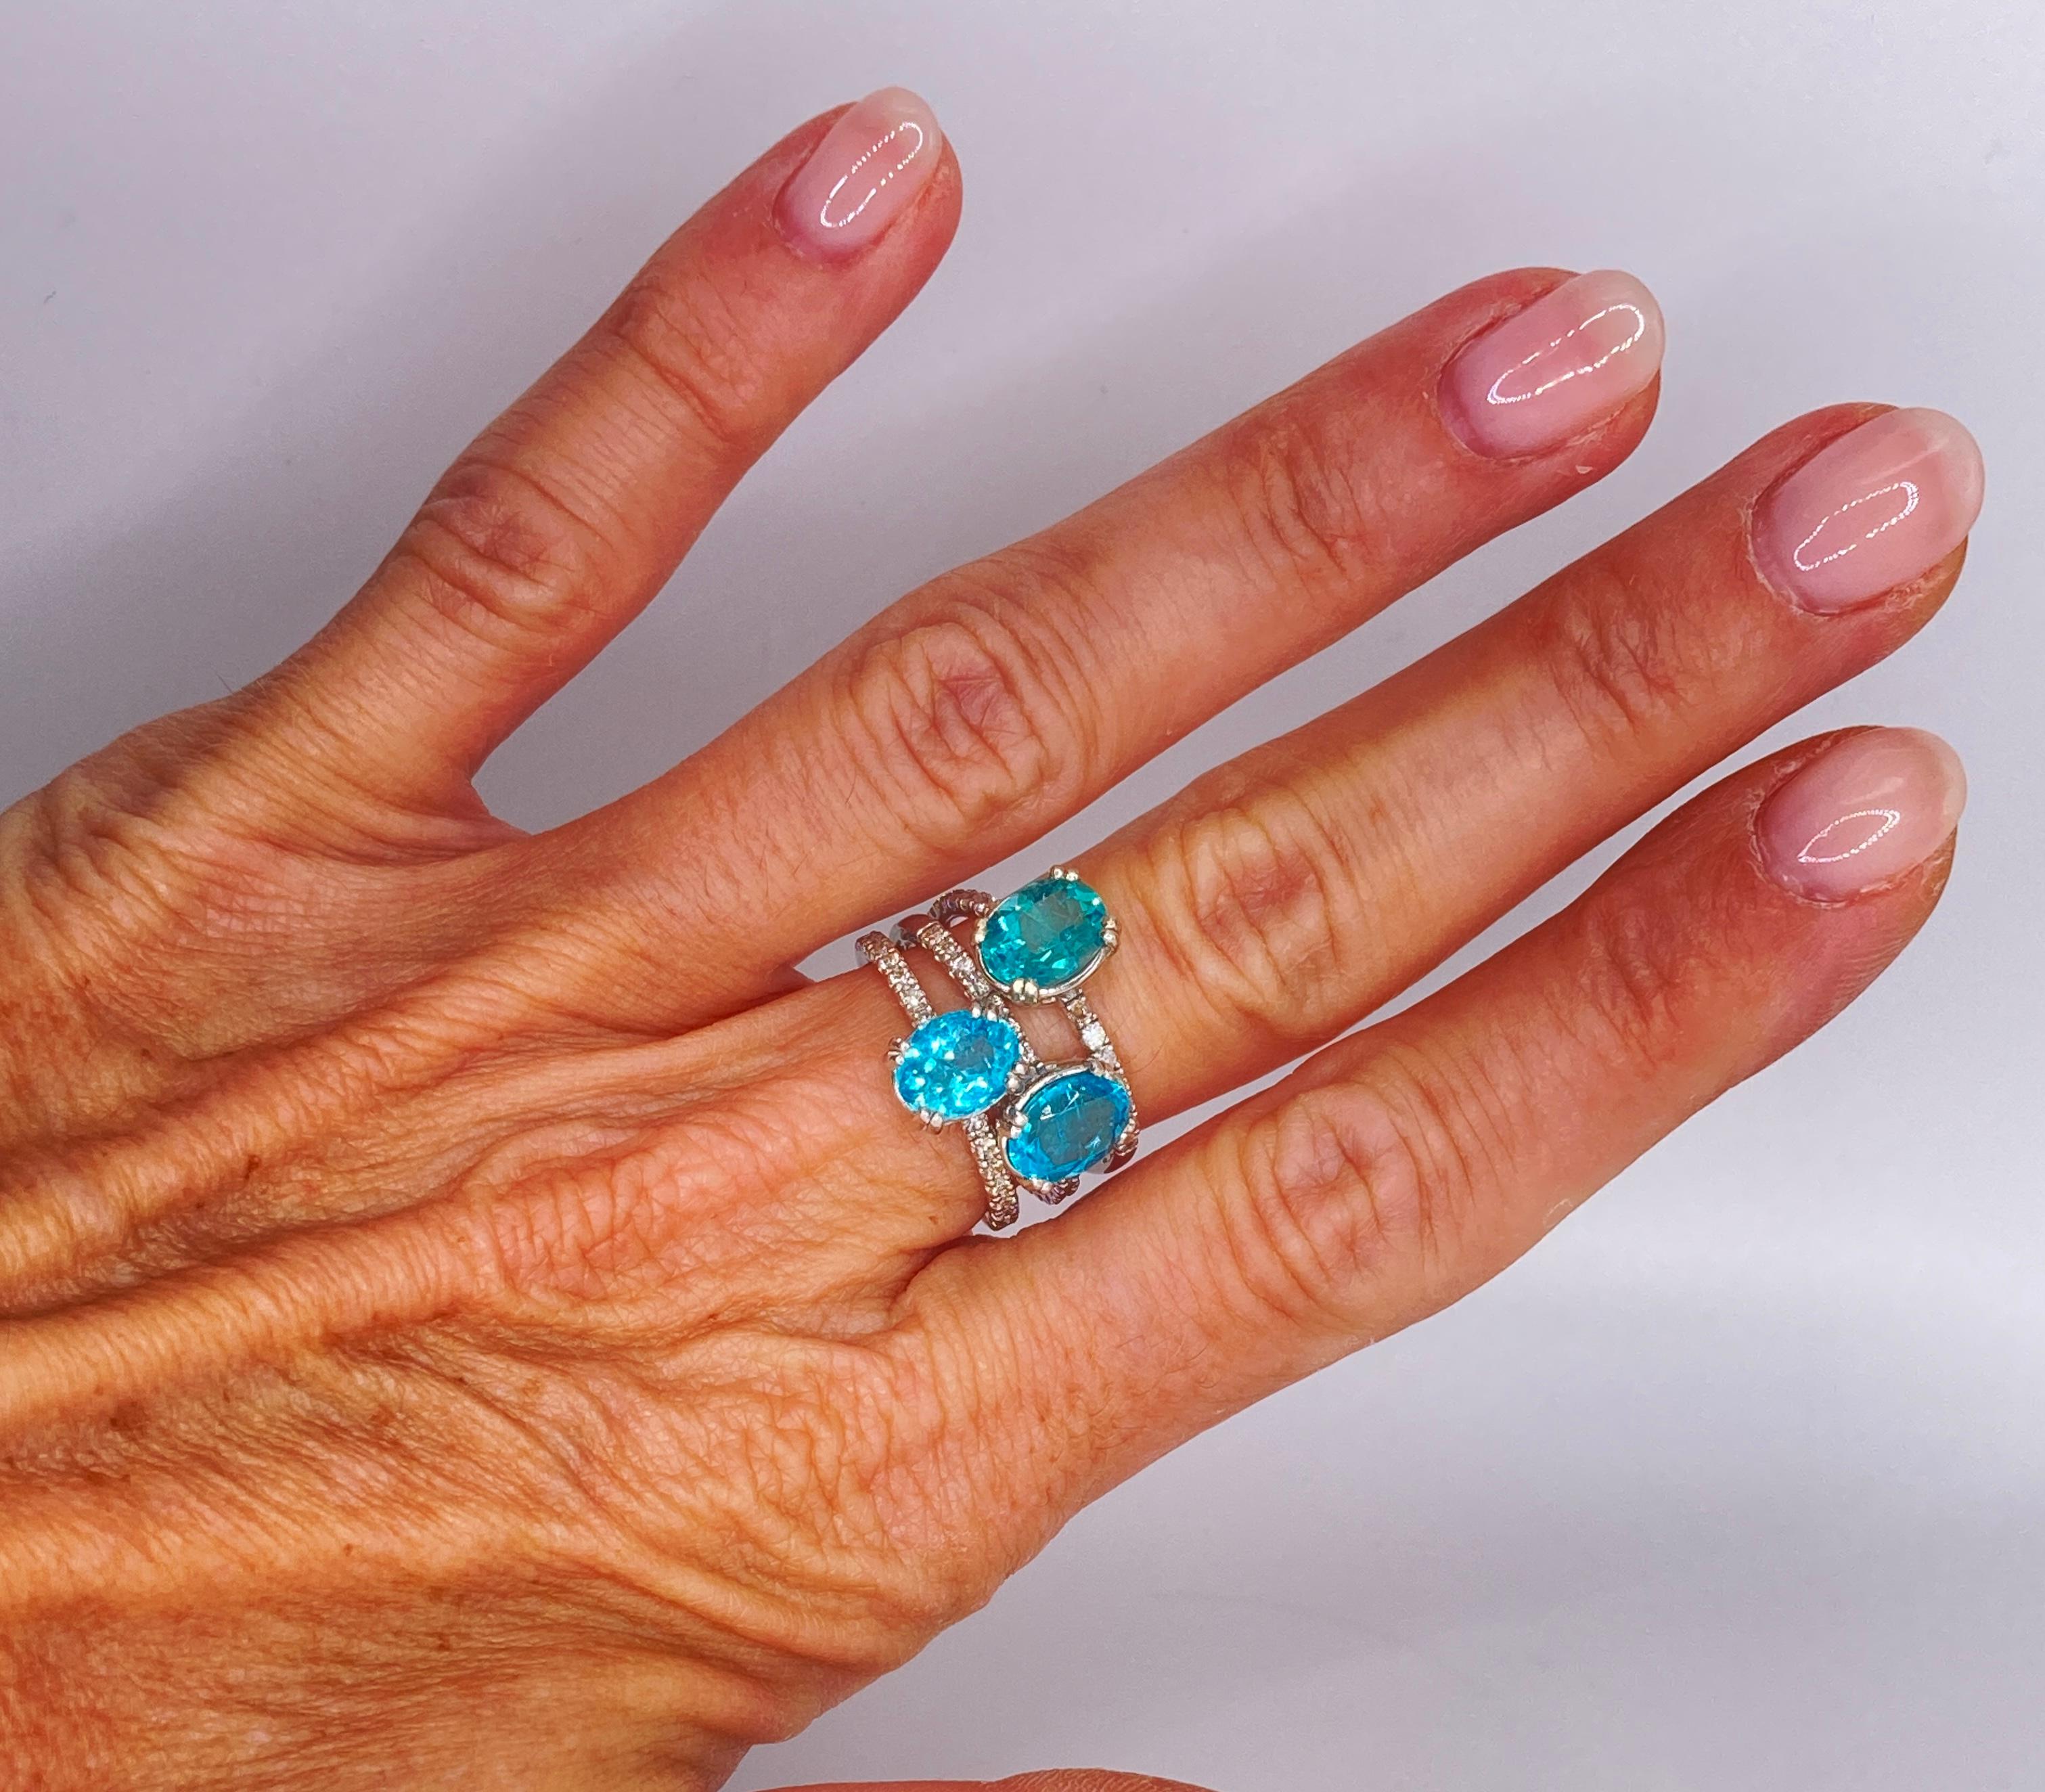 This Three stones Apatite ring is actually three separate Rings stacked together. Set on 14 kt white gold with brilliant cut diamonds.